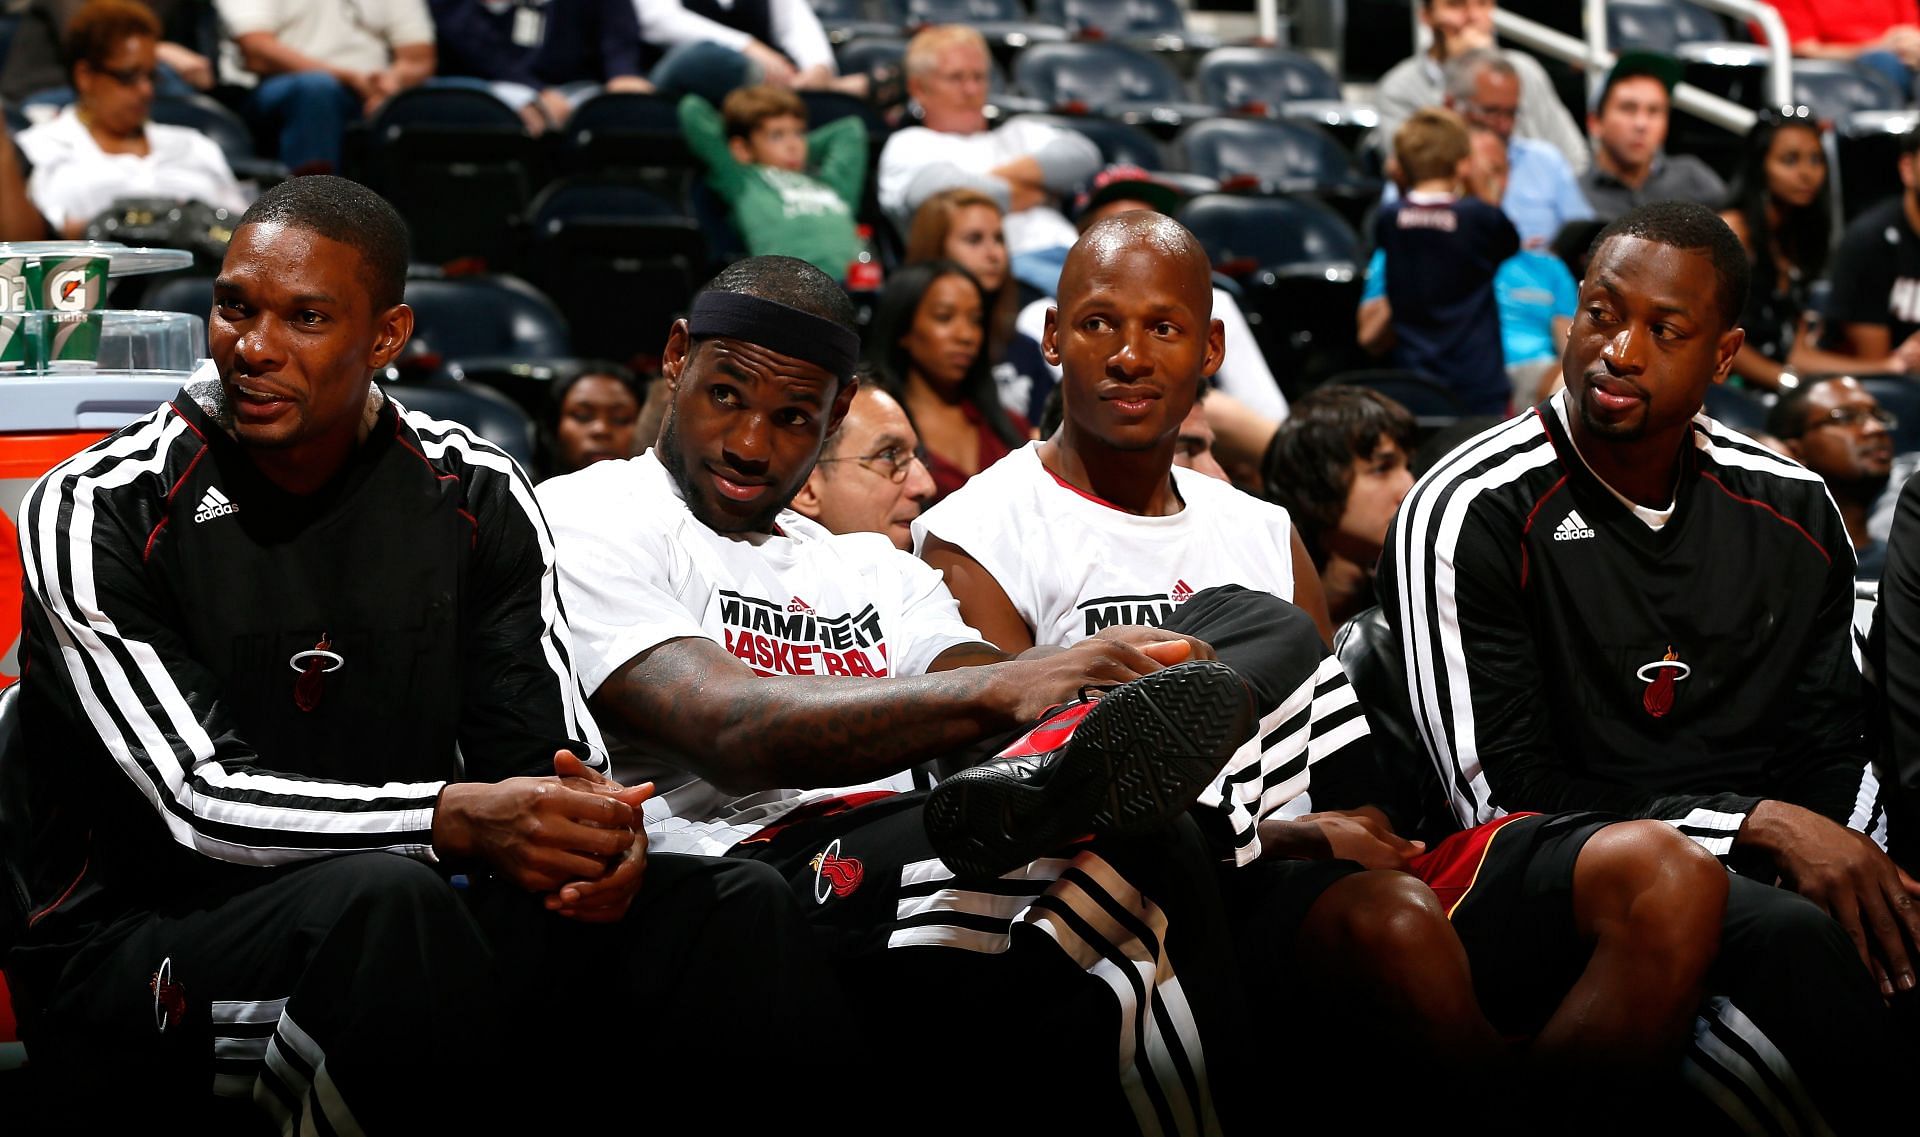 Chris Bosh, from left; LeBron James, Ray Allen and Dwyane Wade #3 of the Miami Heat watch the game against the Atlanta Hawks at Philips Arena on October 7, 2012, in Atlanta.